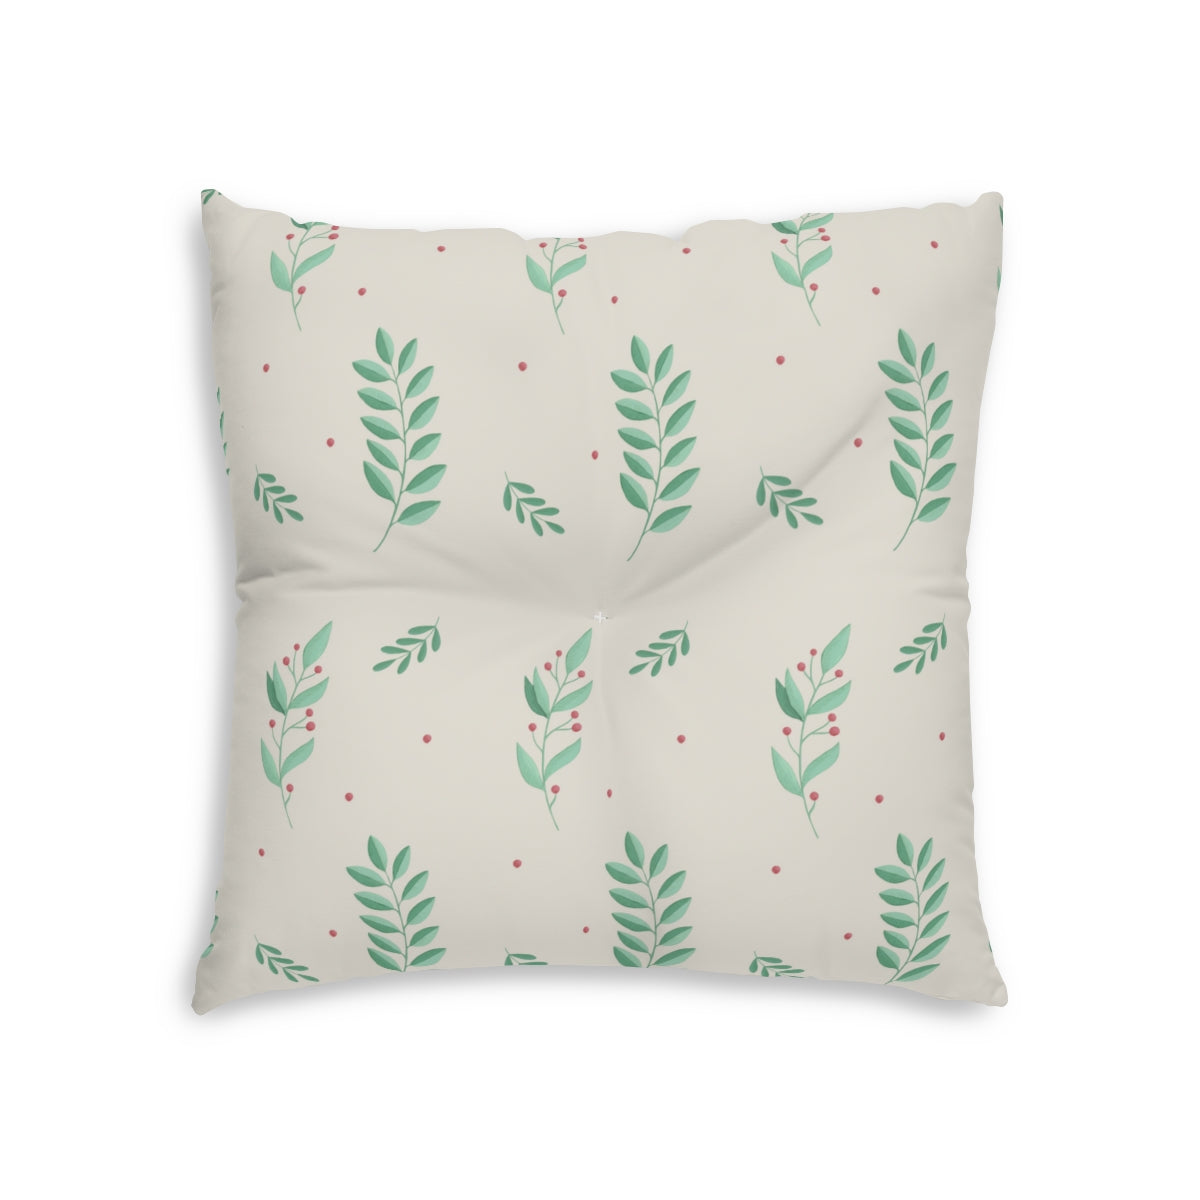 Lifestyle Details - Square Tufted Holiday Floor Pillow - Large Holly - 26x26 - Front View